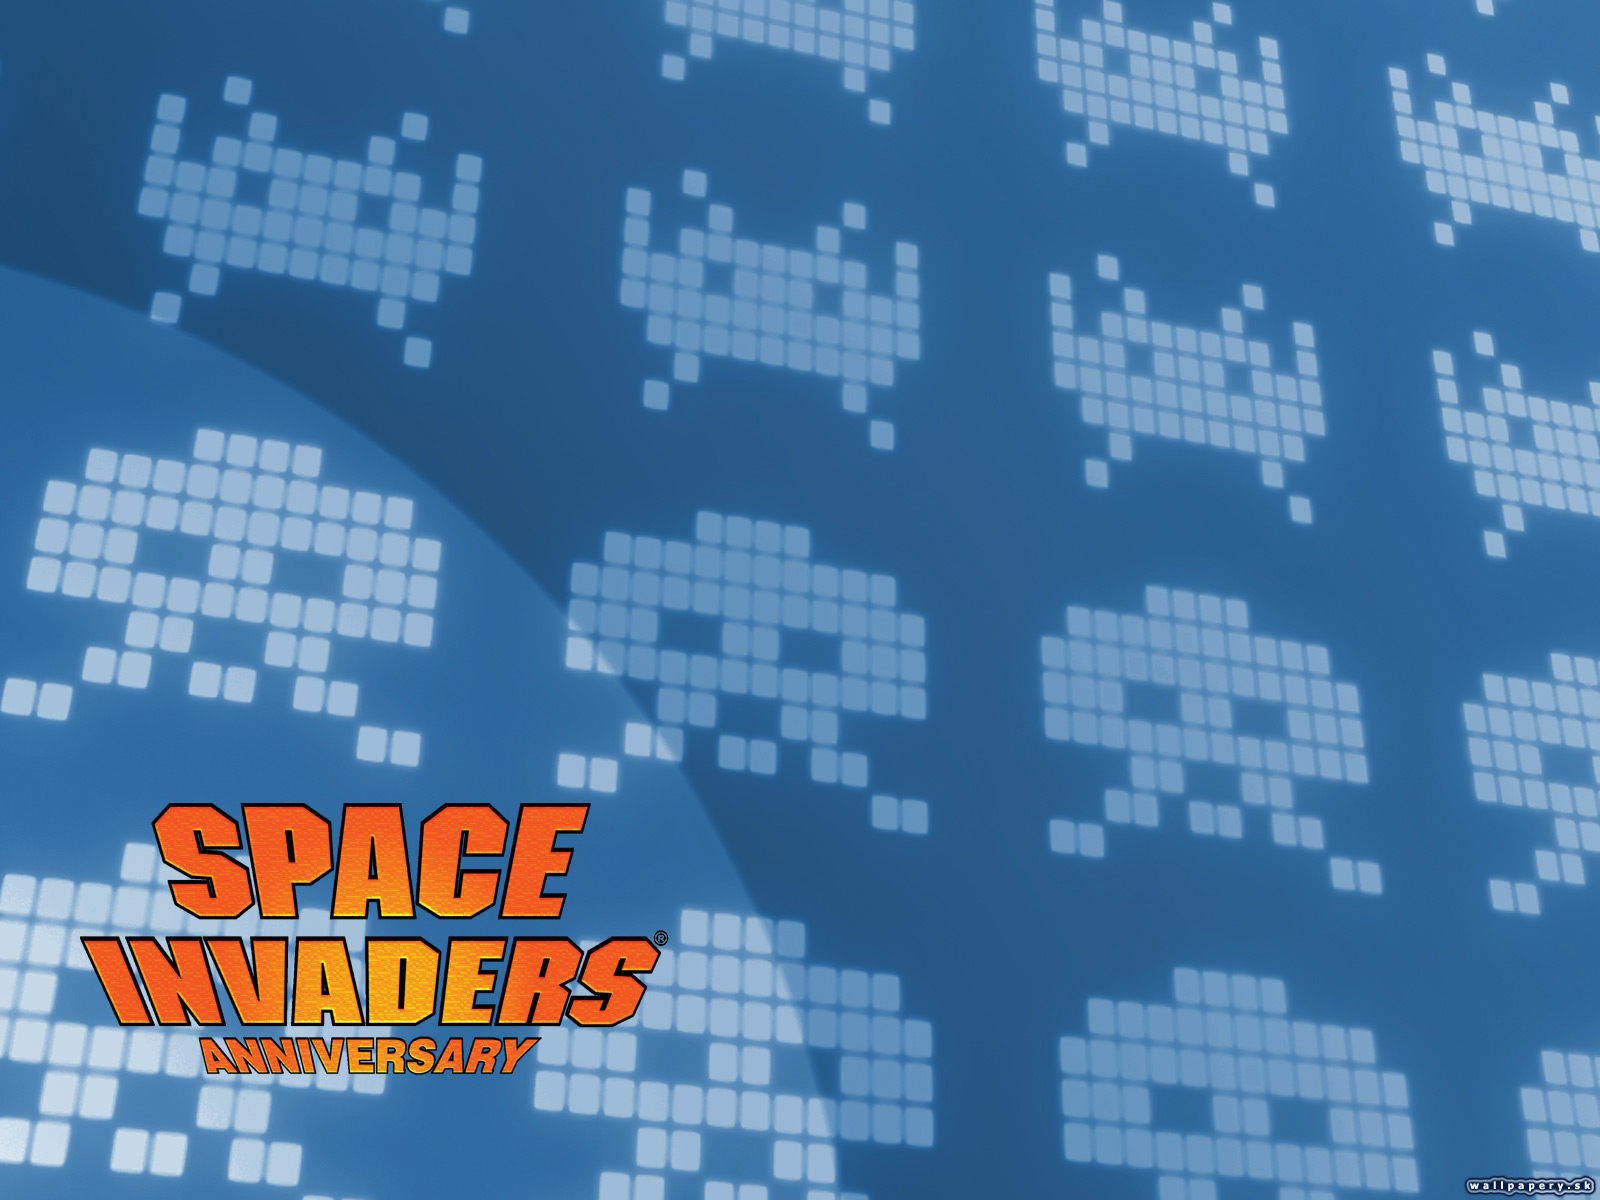 Space Invaders Anniversary - wallpaper 1